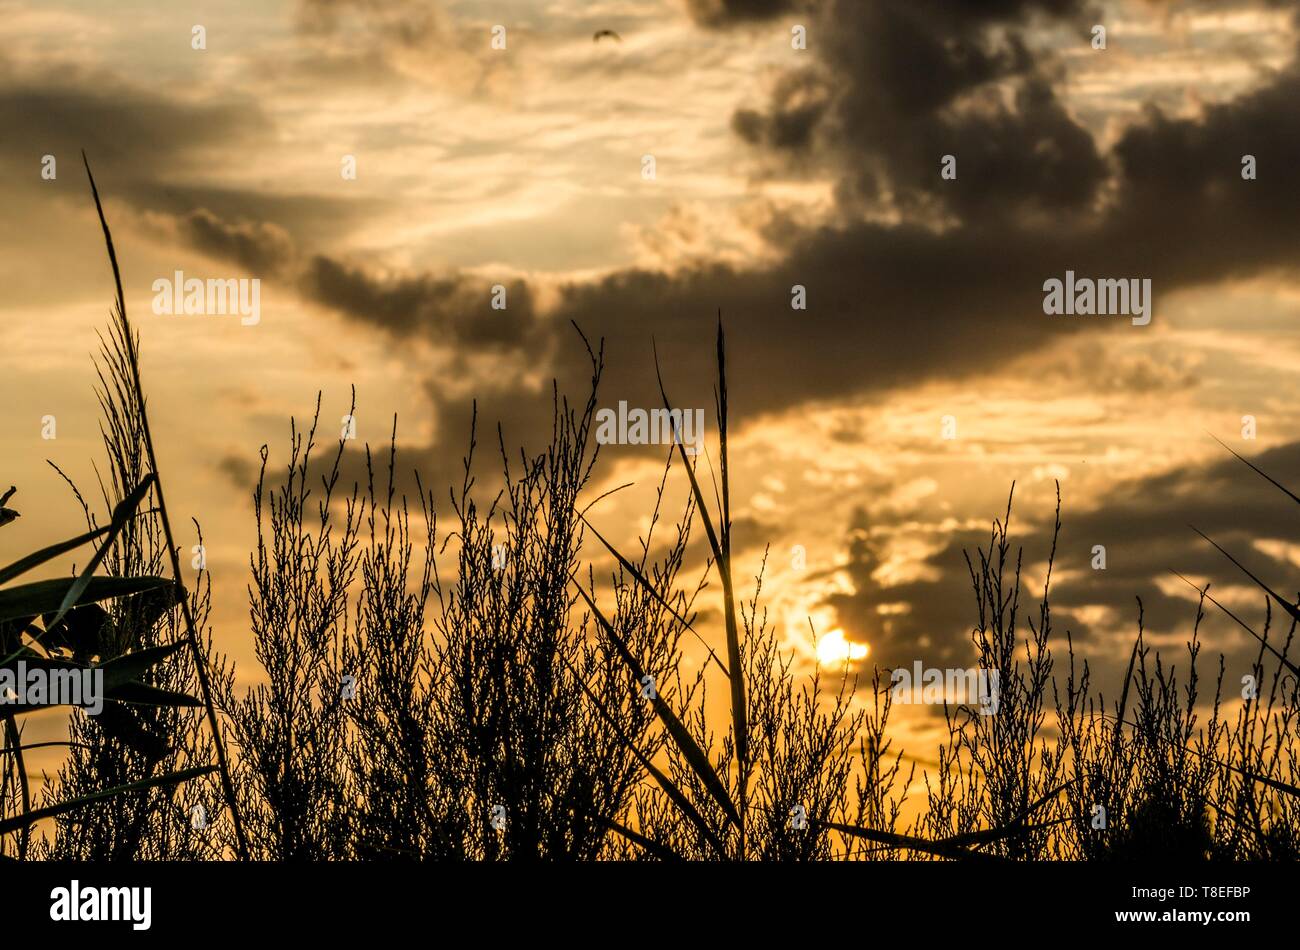 Background of sunset landscape with silhouettes of plants in the foreground Stock Photo